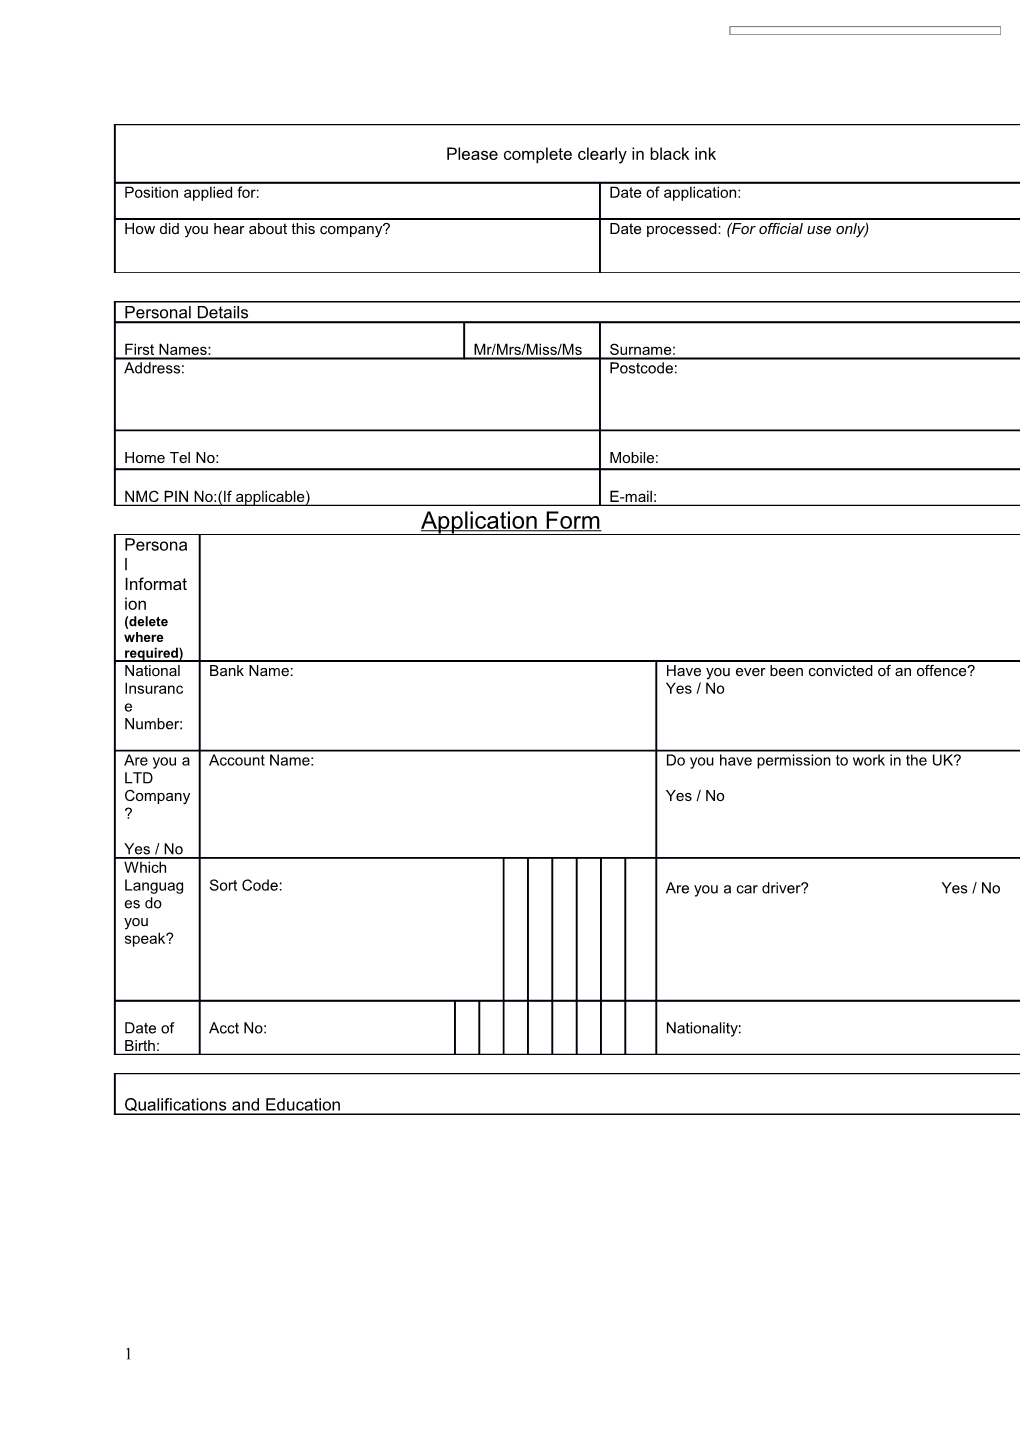 Application Form s67